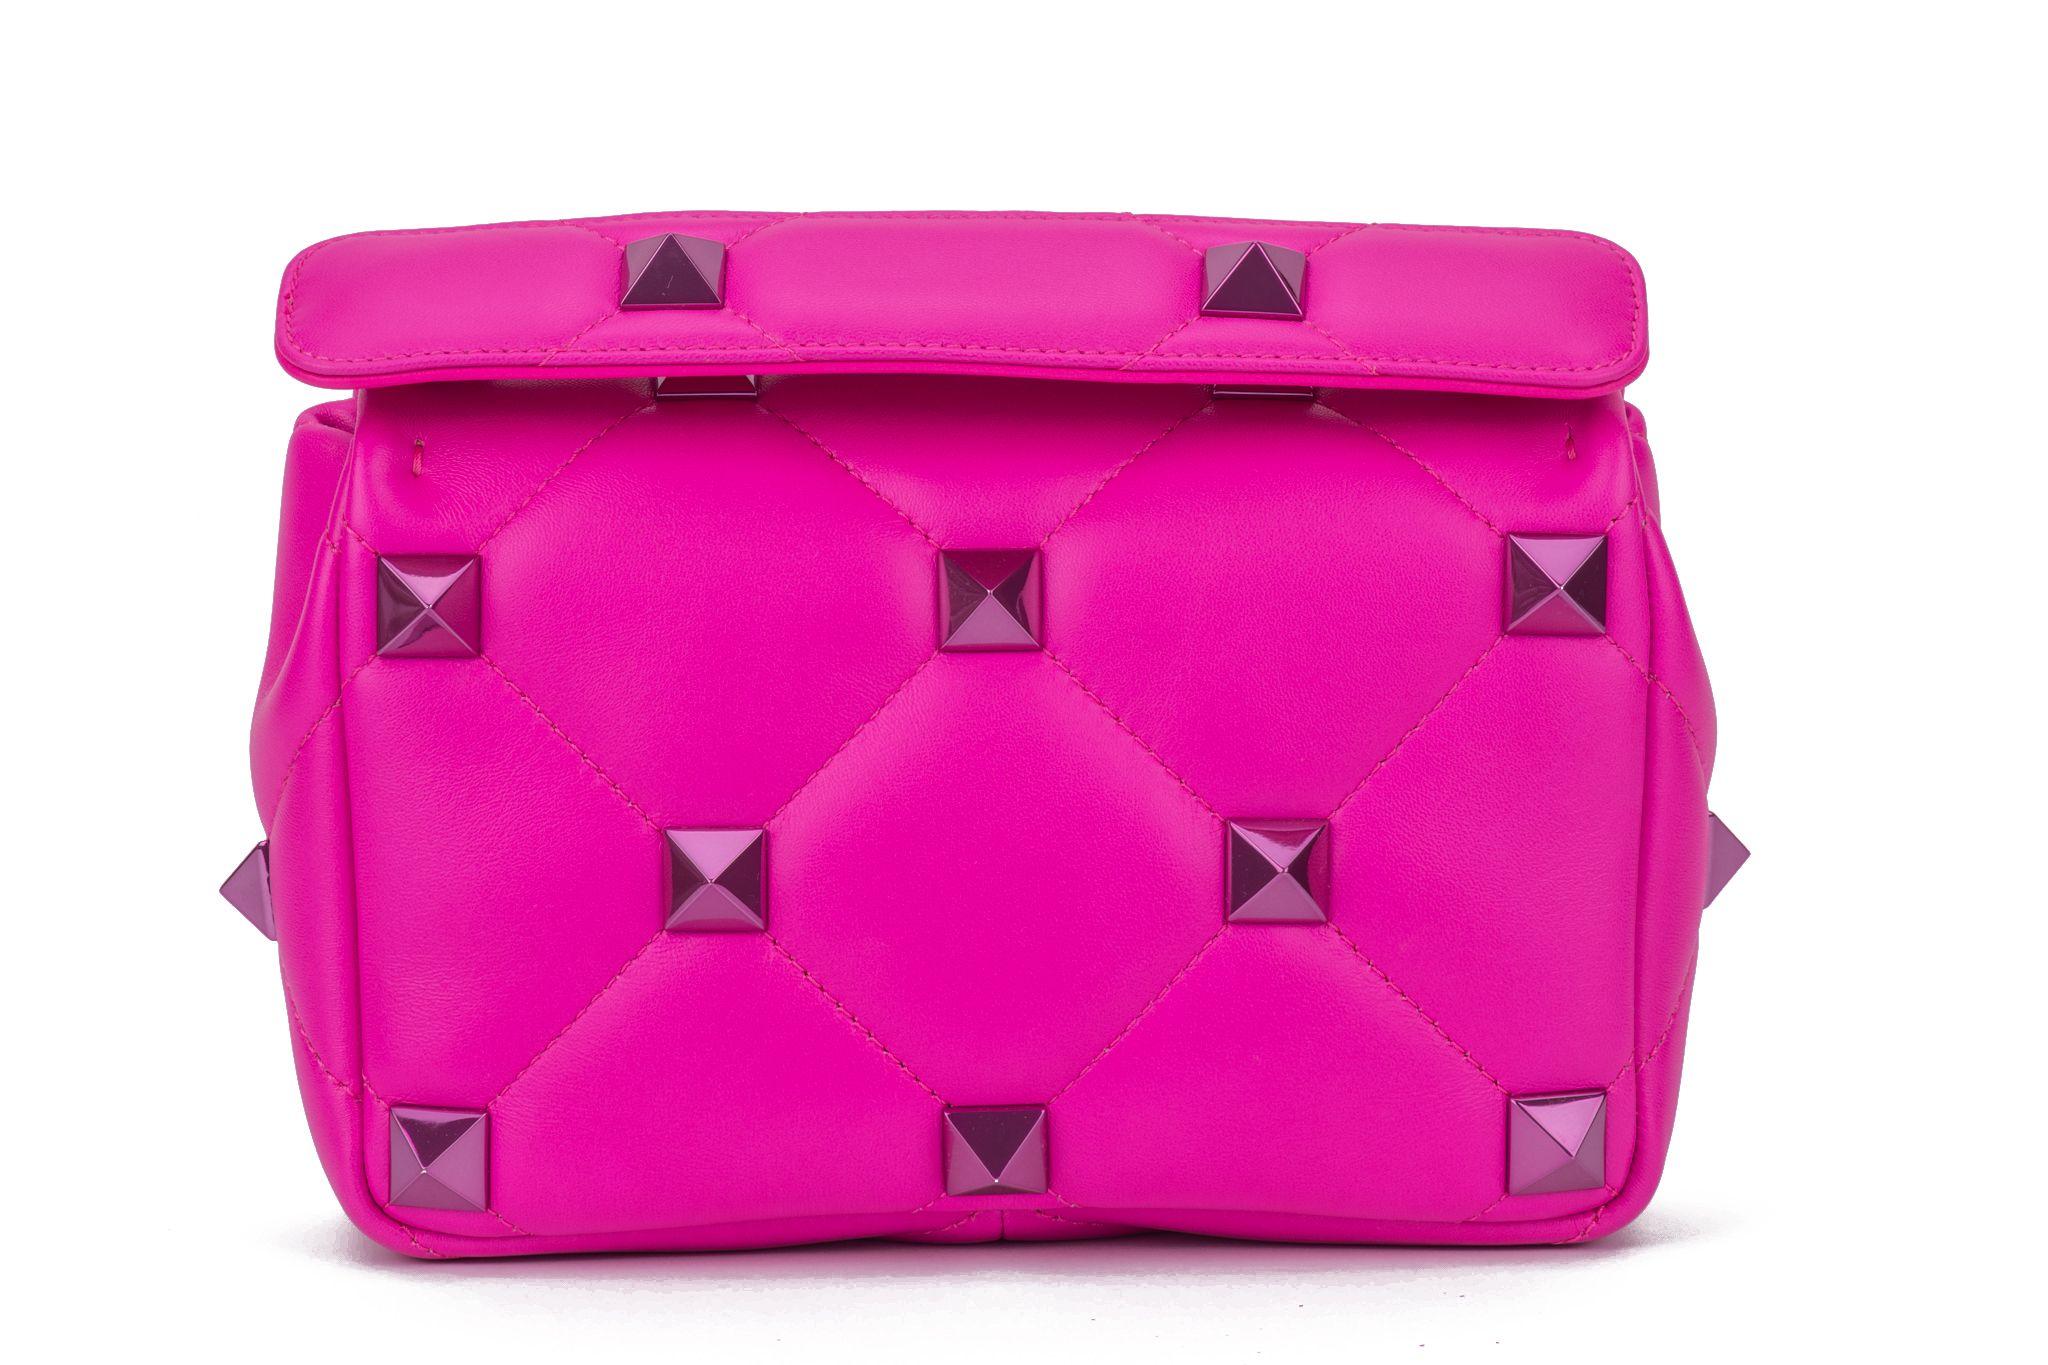 Valentino Roman Stud Collection in pink lambskin leather. Diamond-quilted shoulder bag with tonal studs and a versatile top handle and cross body strap combination. Handle drop 3.5”, detachable strap 25”.  The bag is new and comes with the original